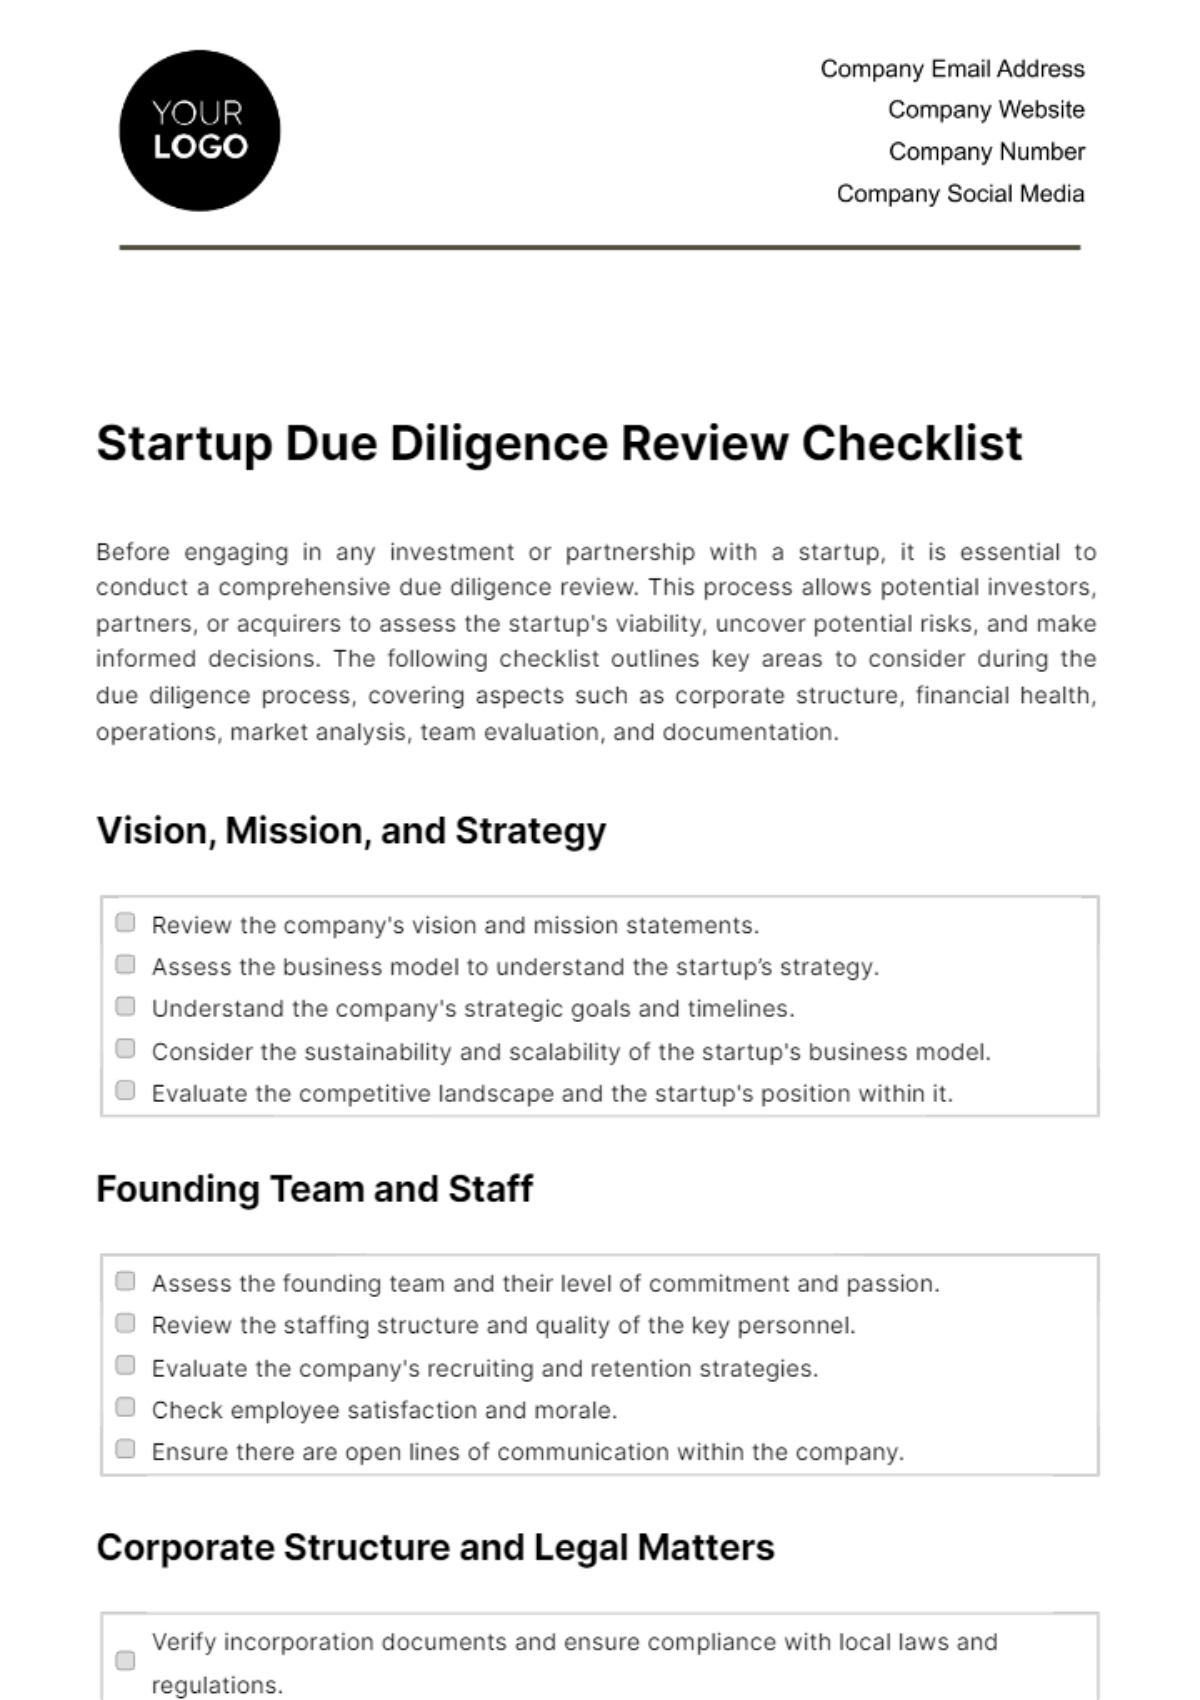 Startup Due Diligence Review Checklist Template